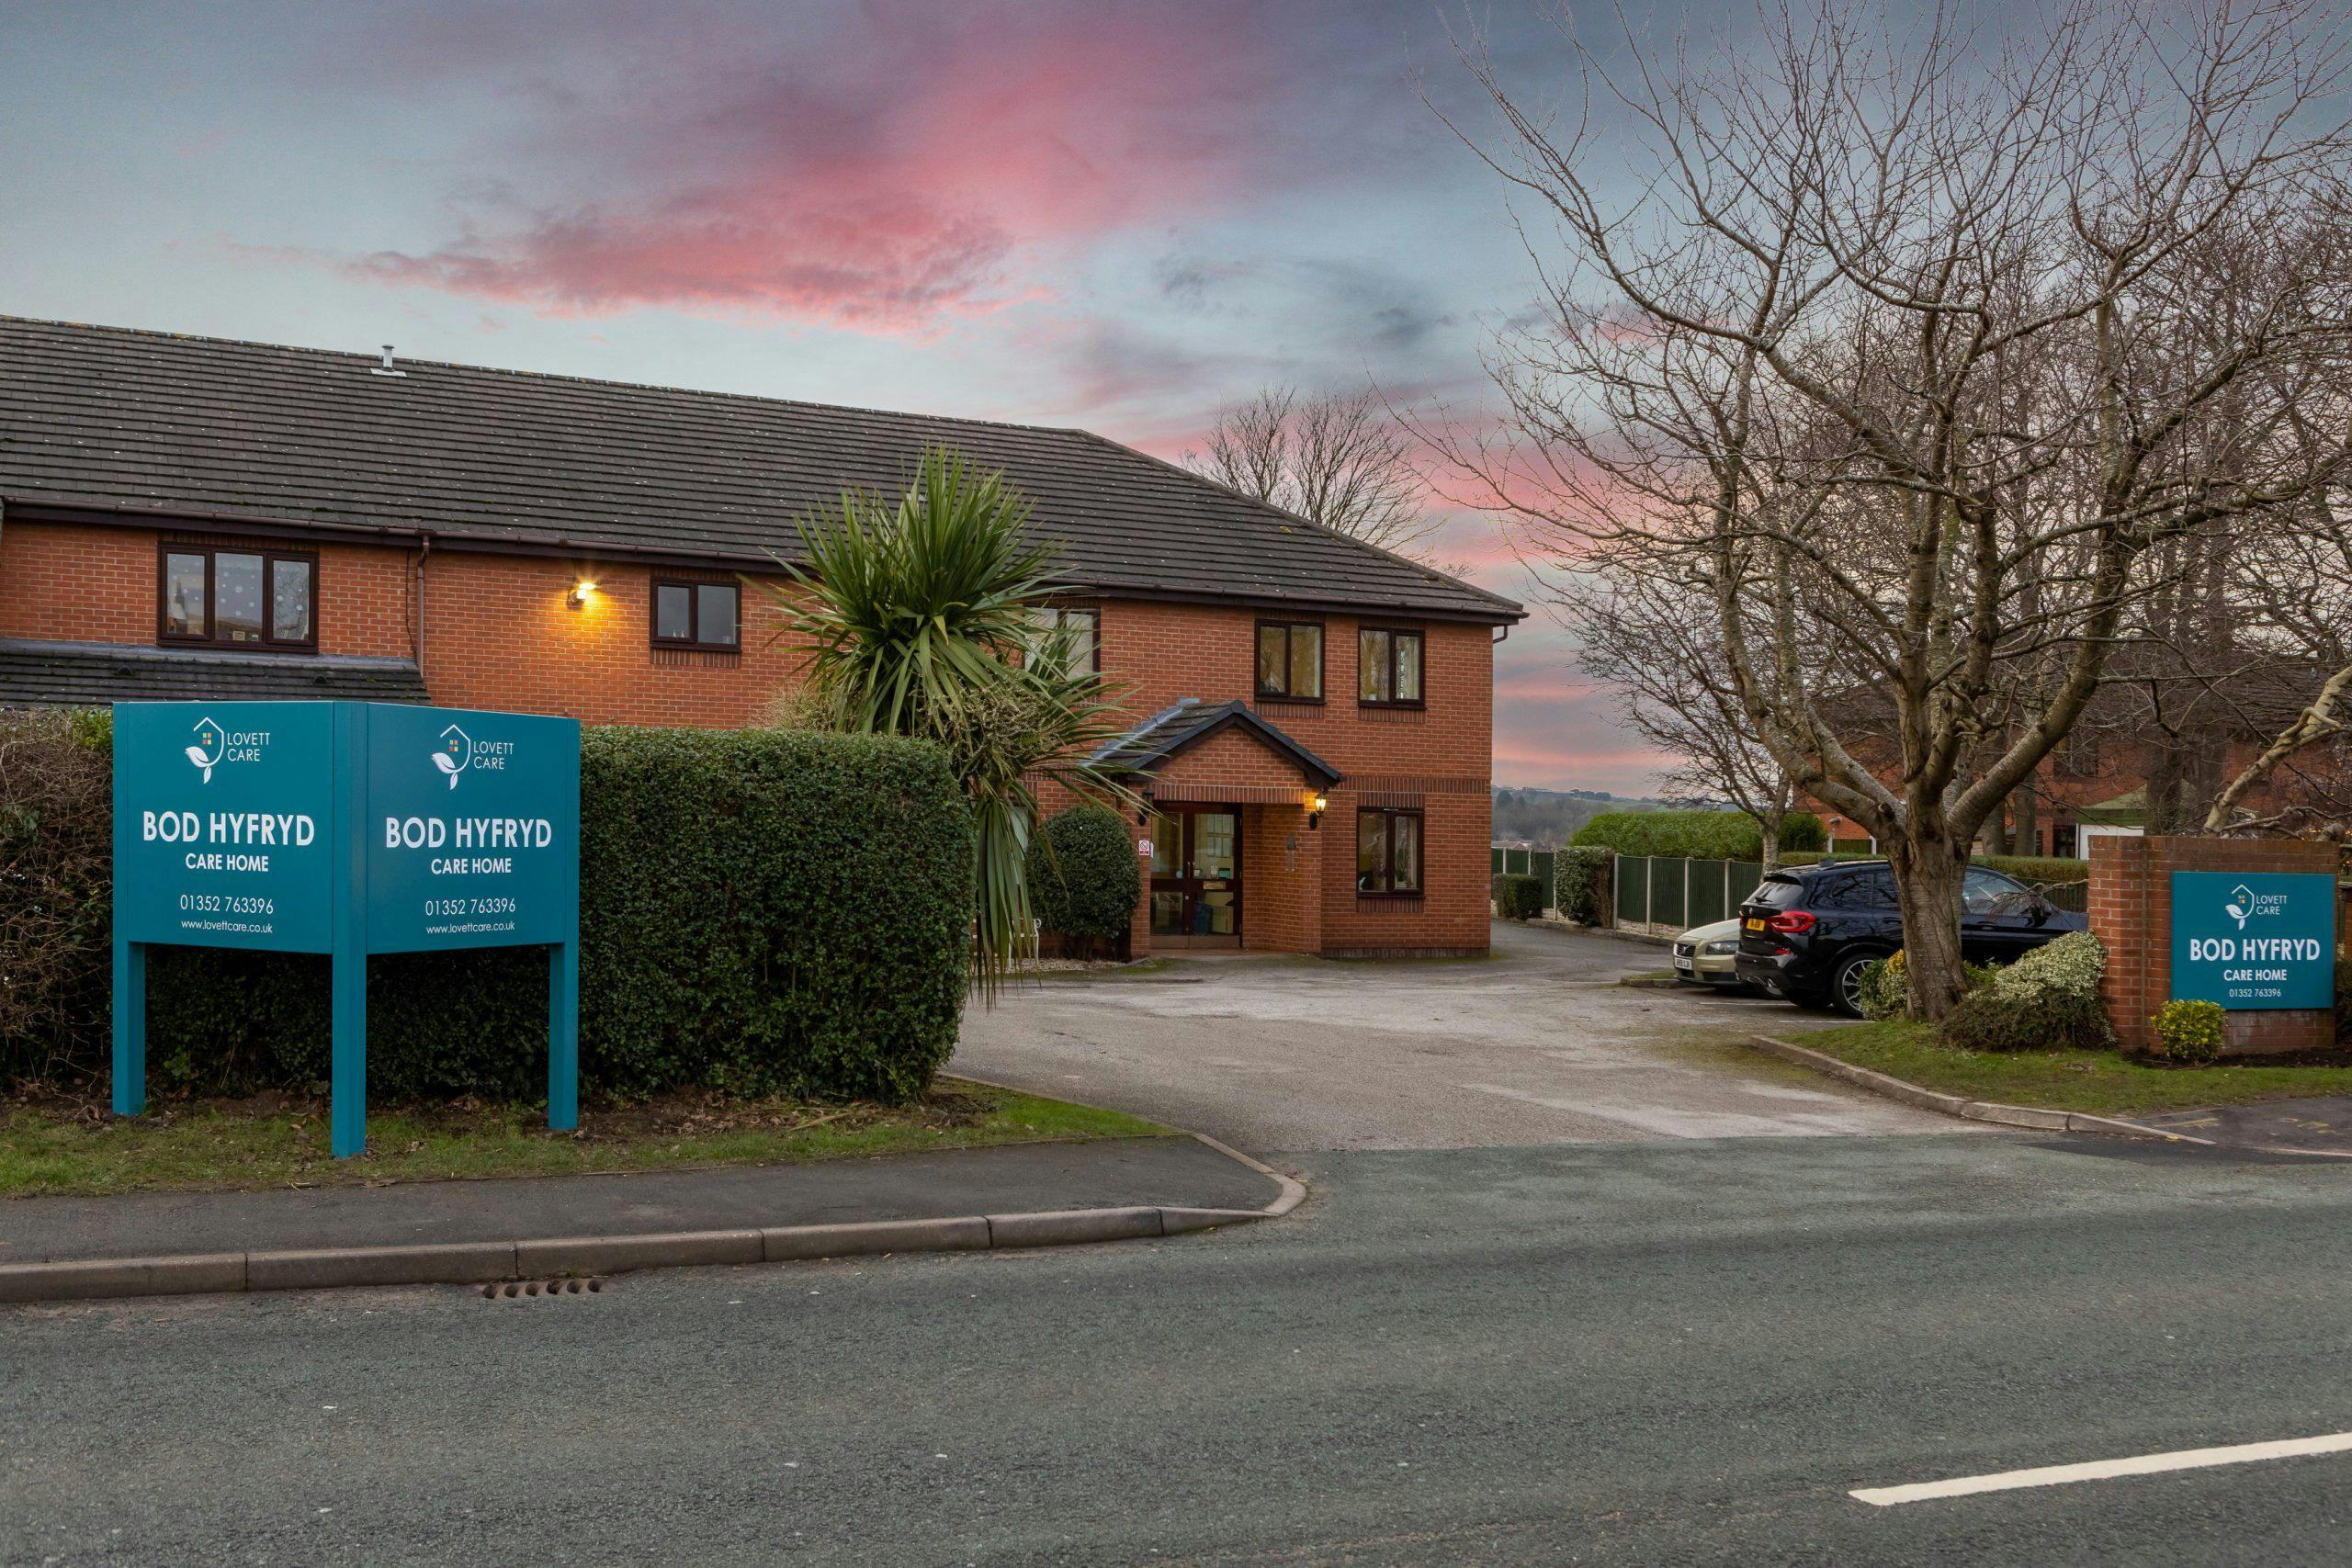 Exterior of Bod Hyfryd care home in Flint, Wales